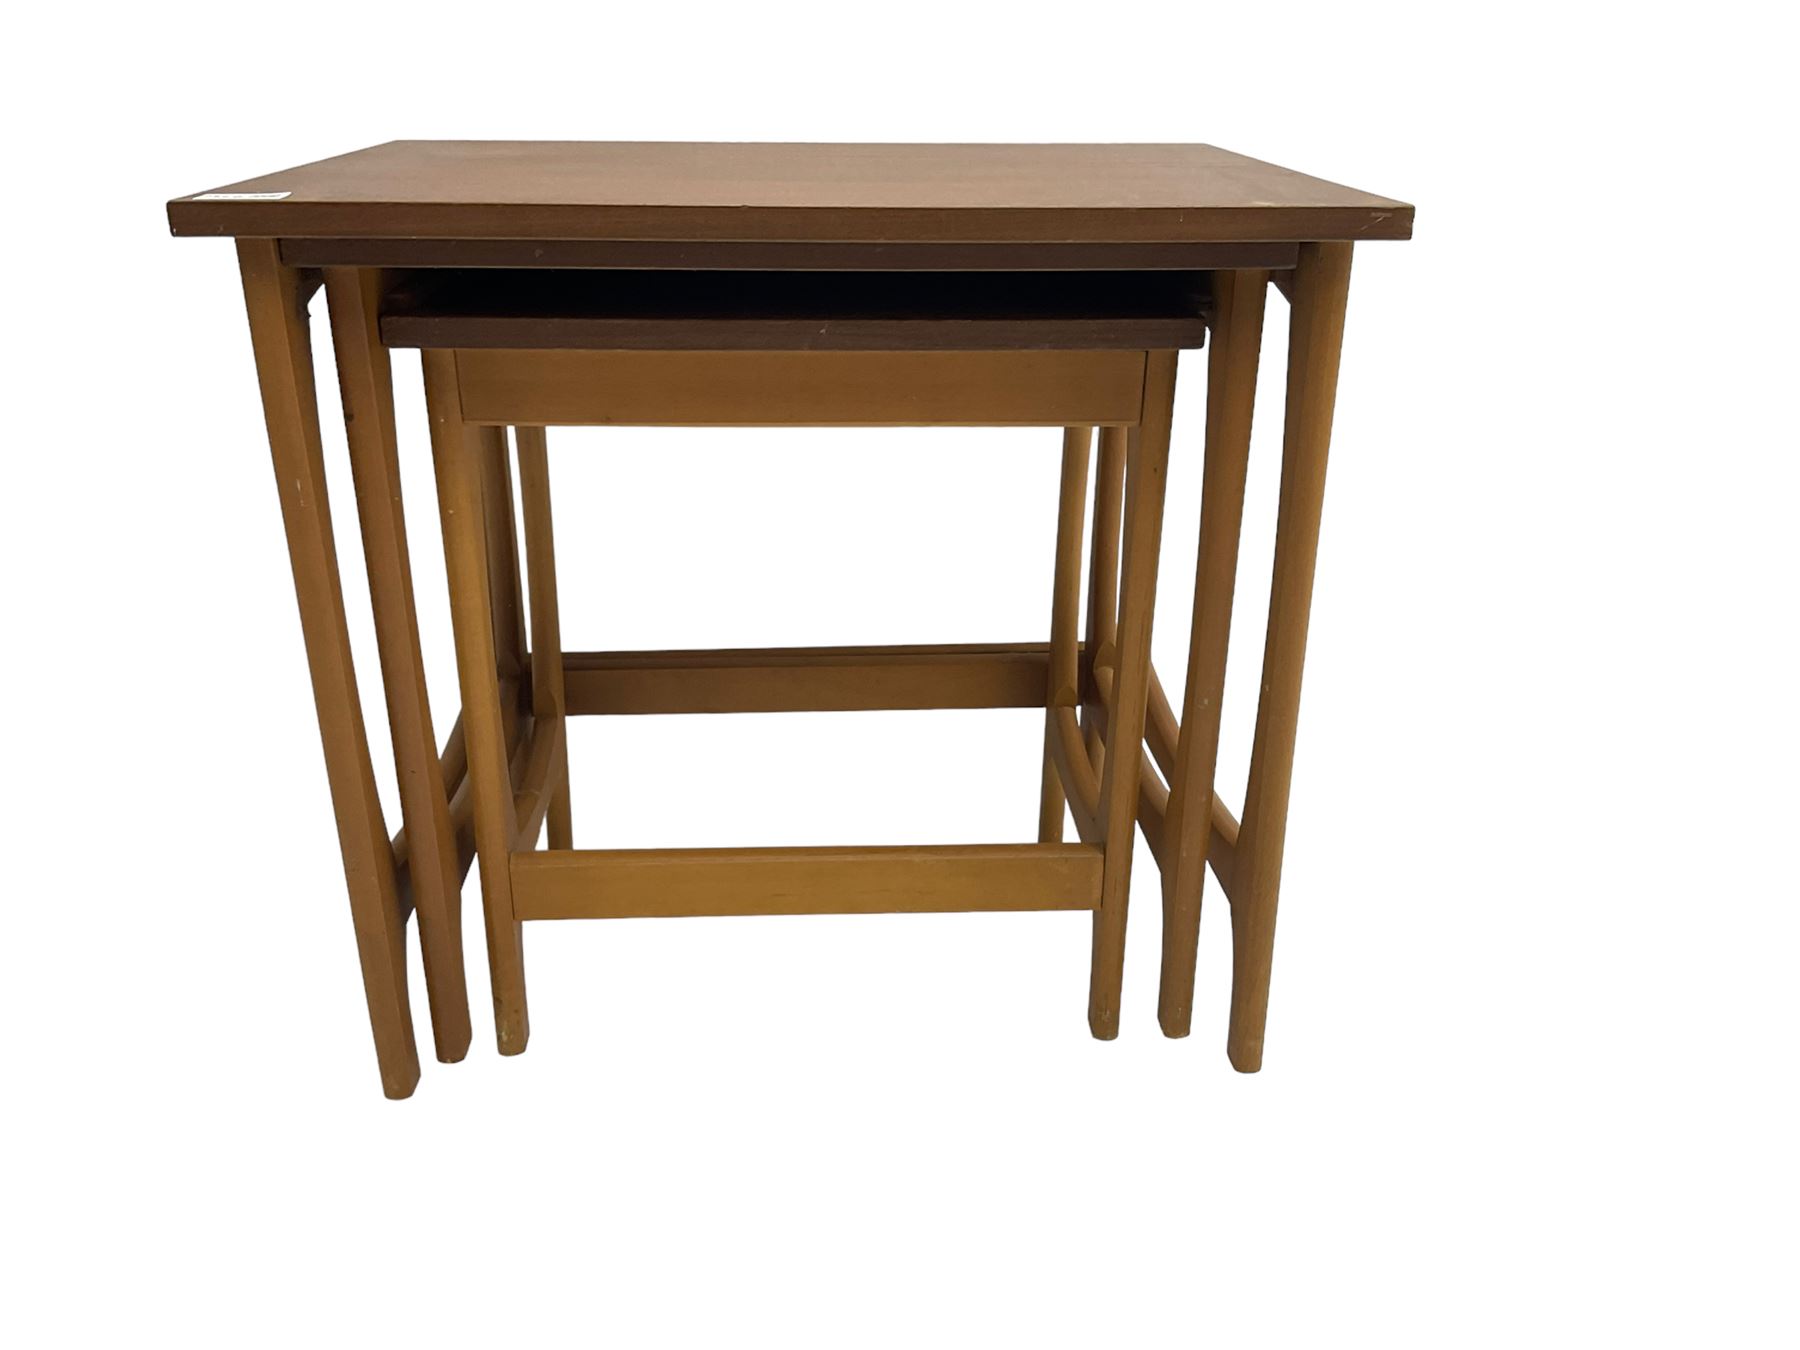 Mid-to late 20th century teak nest of three tables